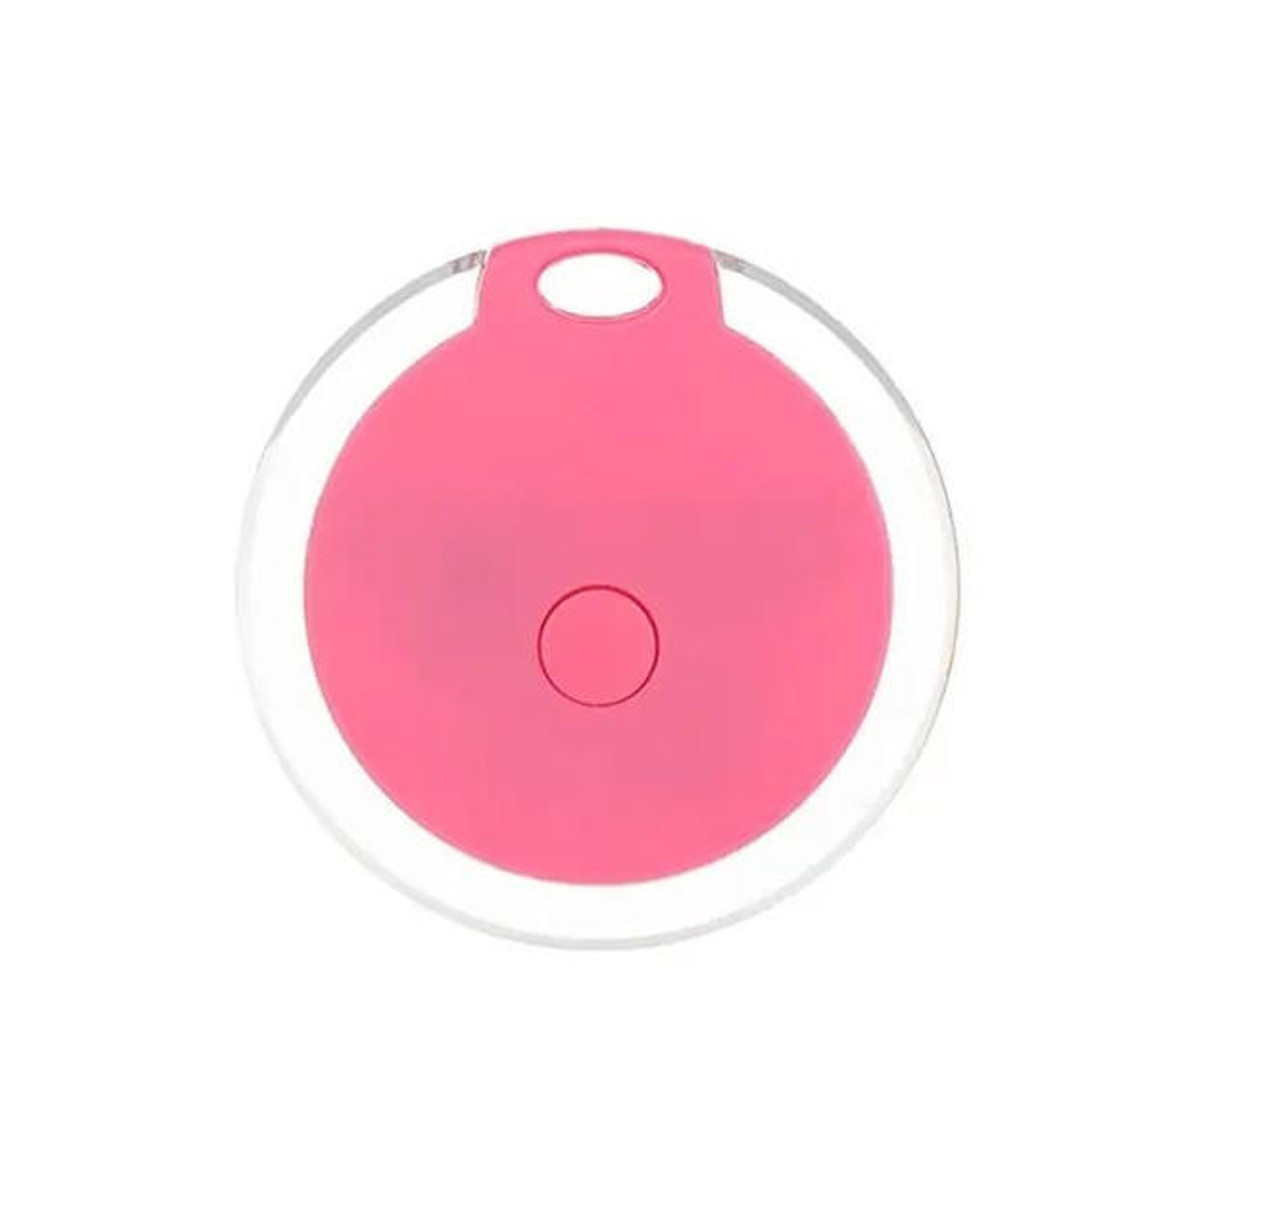  Ant-Loss Blue Tooth Button Smart Tracker/ Mini GPS  